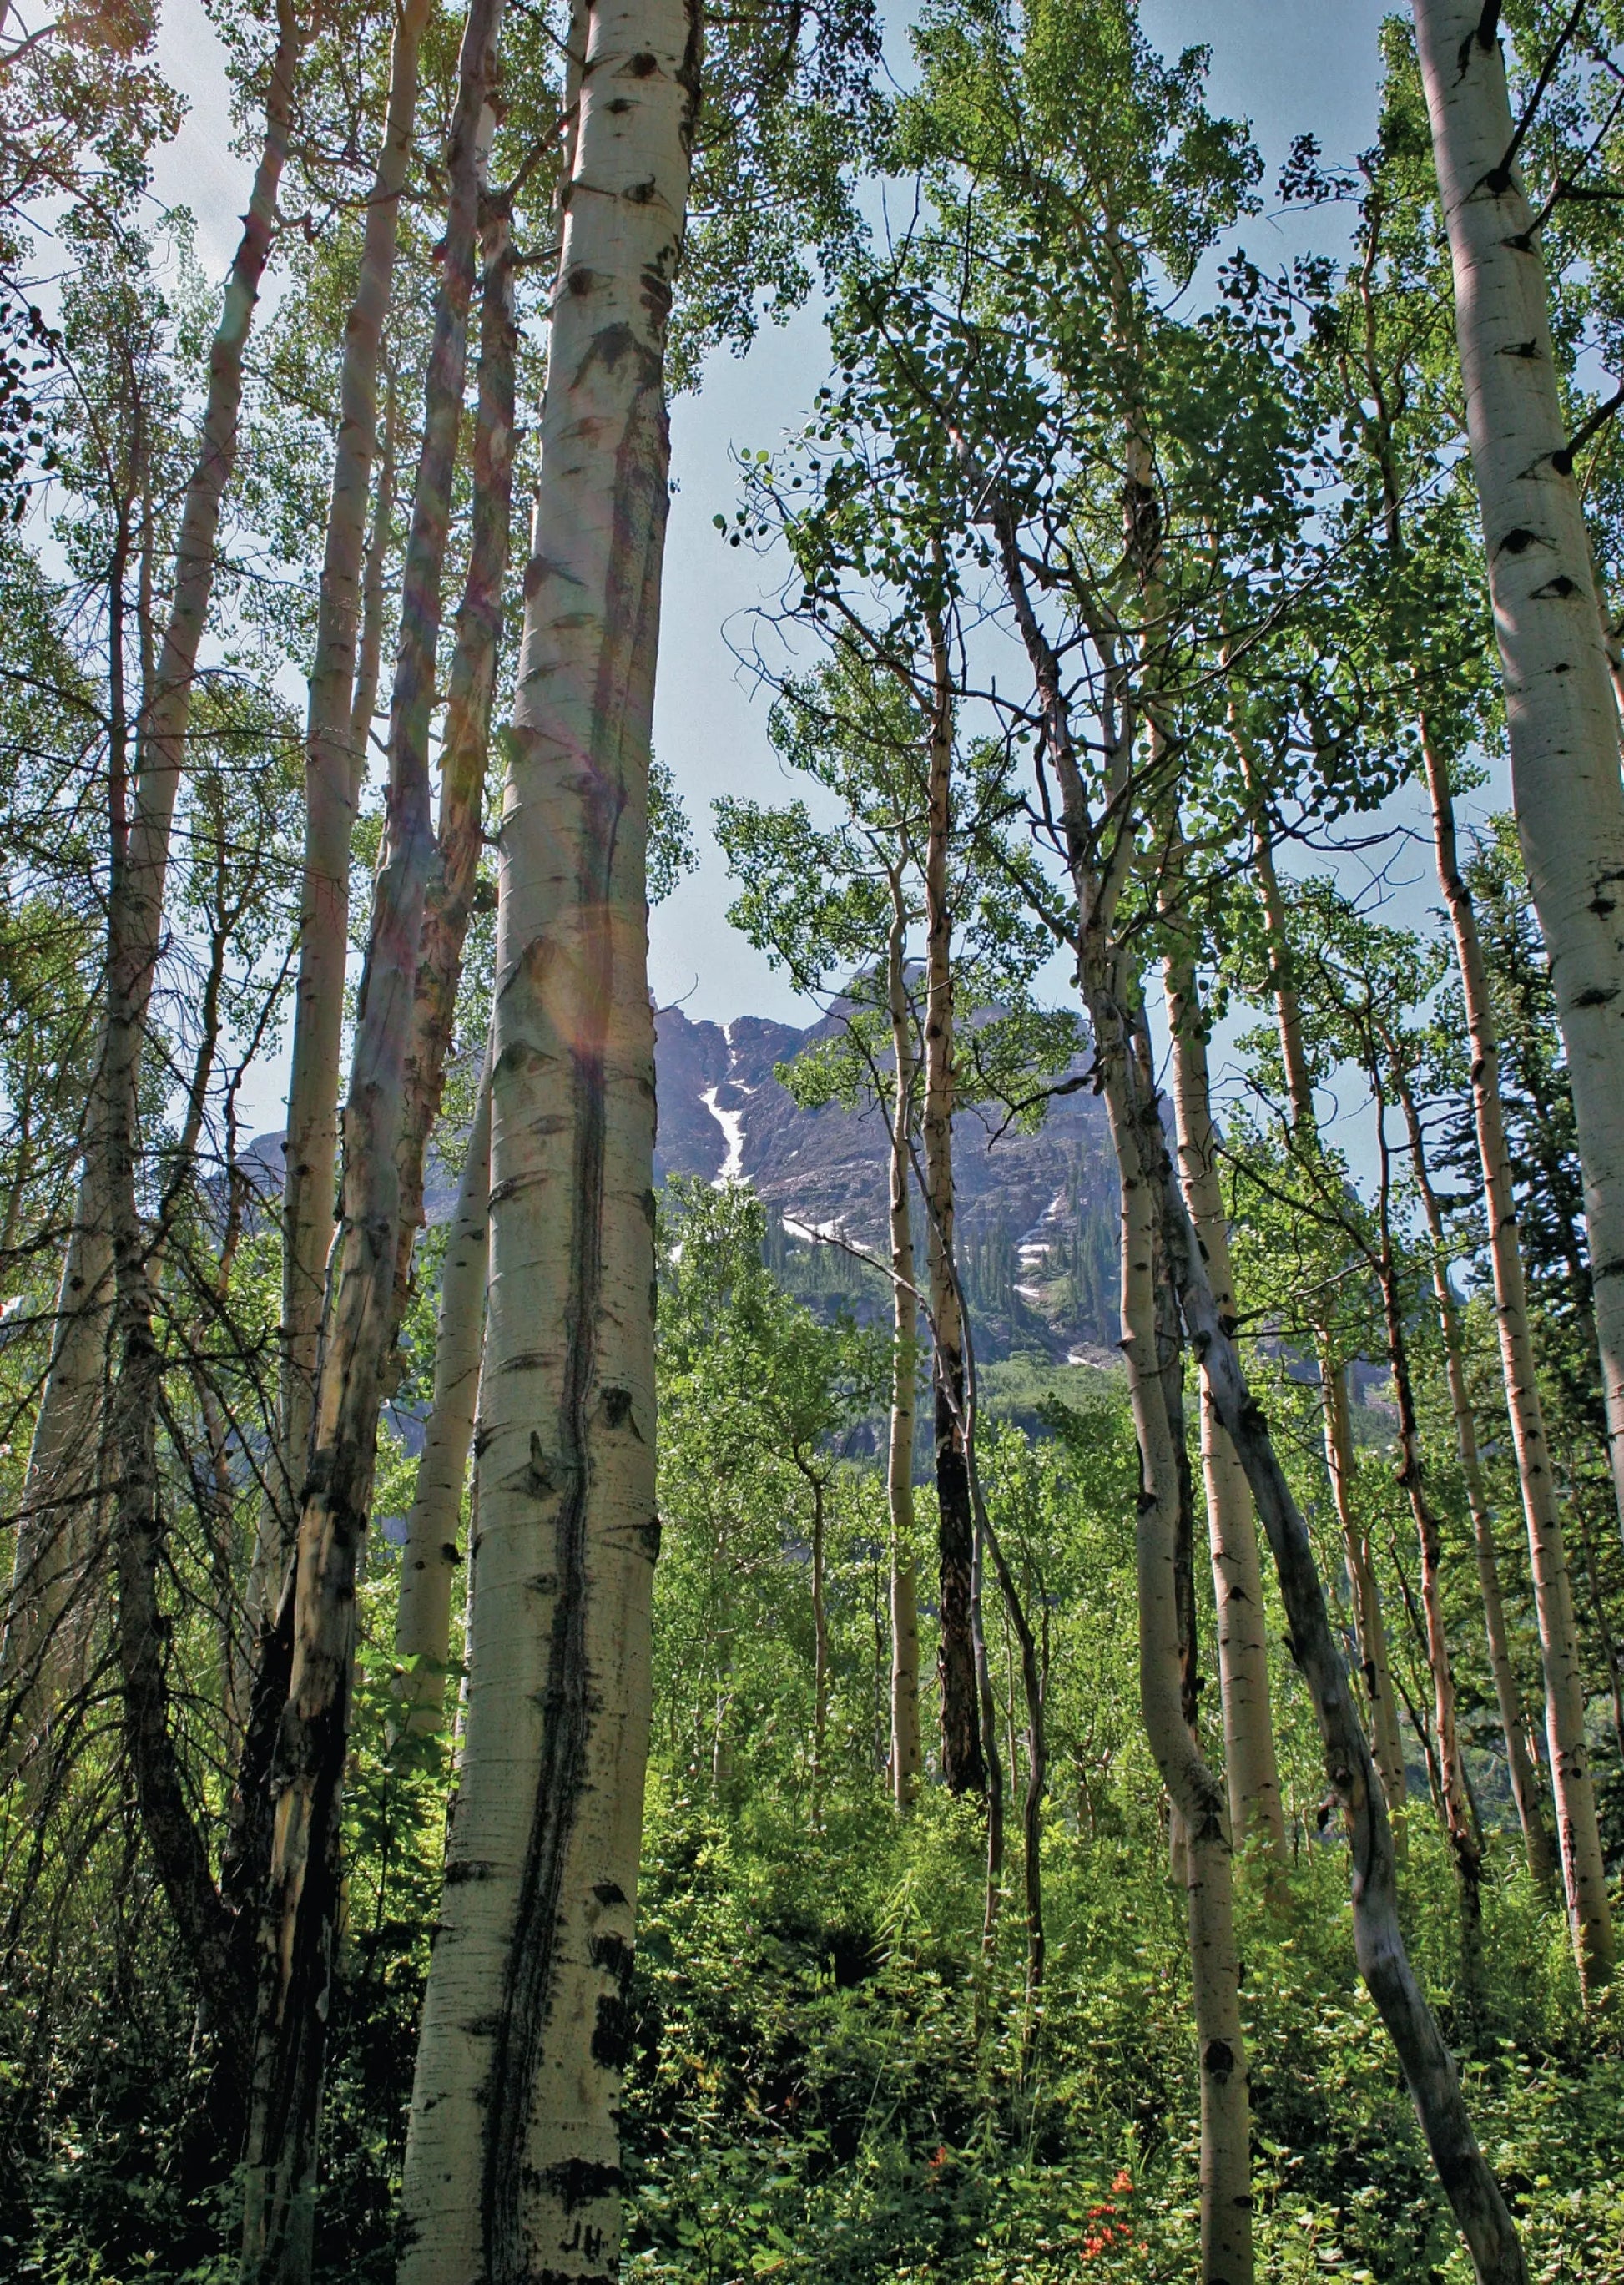 A photo of a towering grove of aspen trees in full springtime bloom. Their white bark and vibrant green leaves create a striking contrast against the backdrop of the snow-capped Rocky Mountains in the distance.